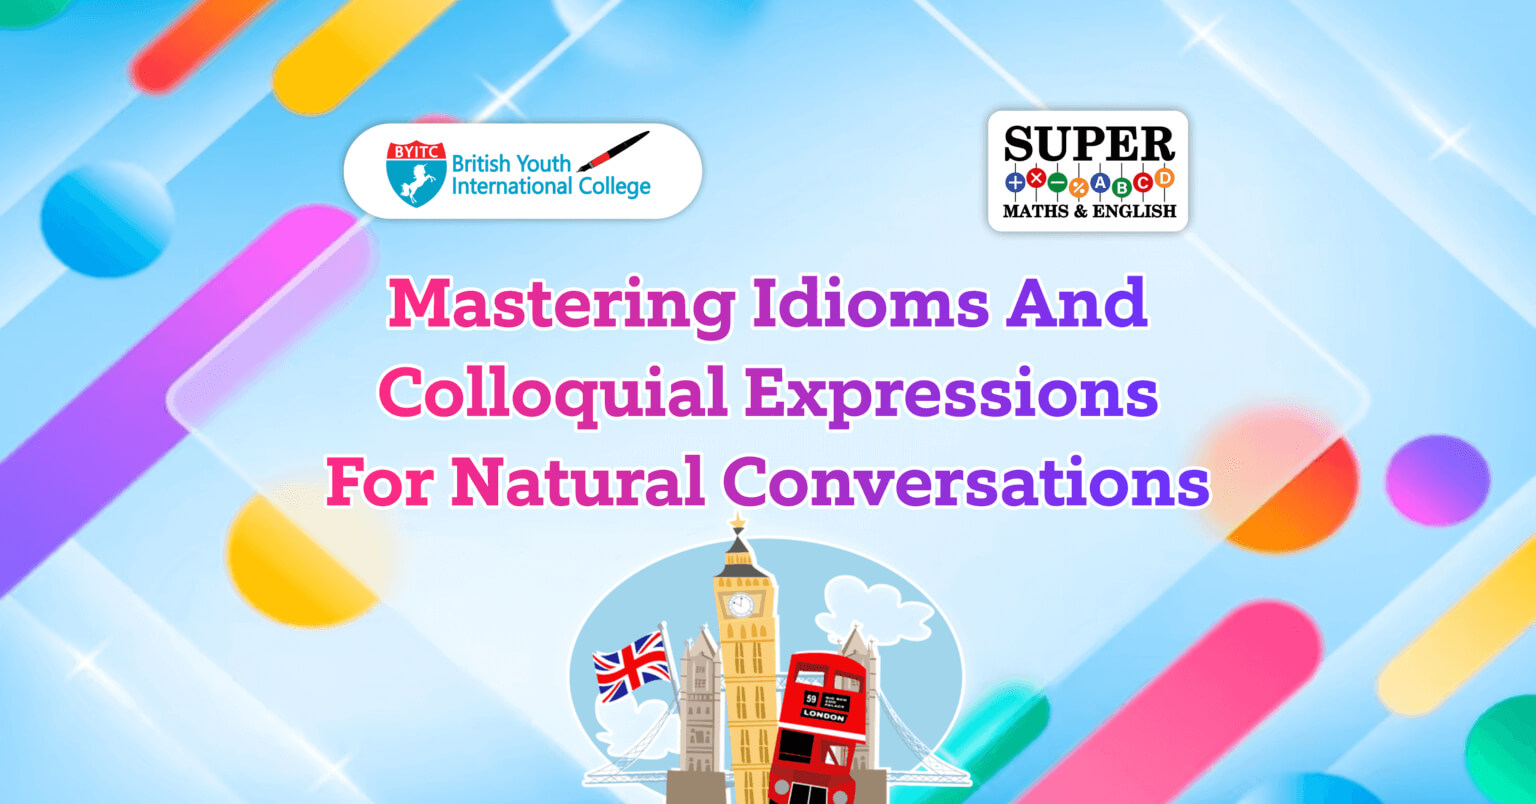 Mastering Idioms and Colloquial Expressions for Natural Conversations